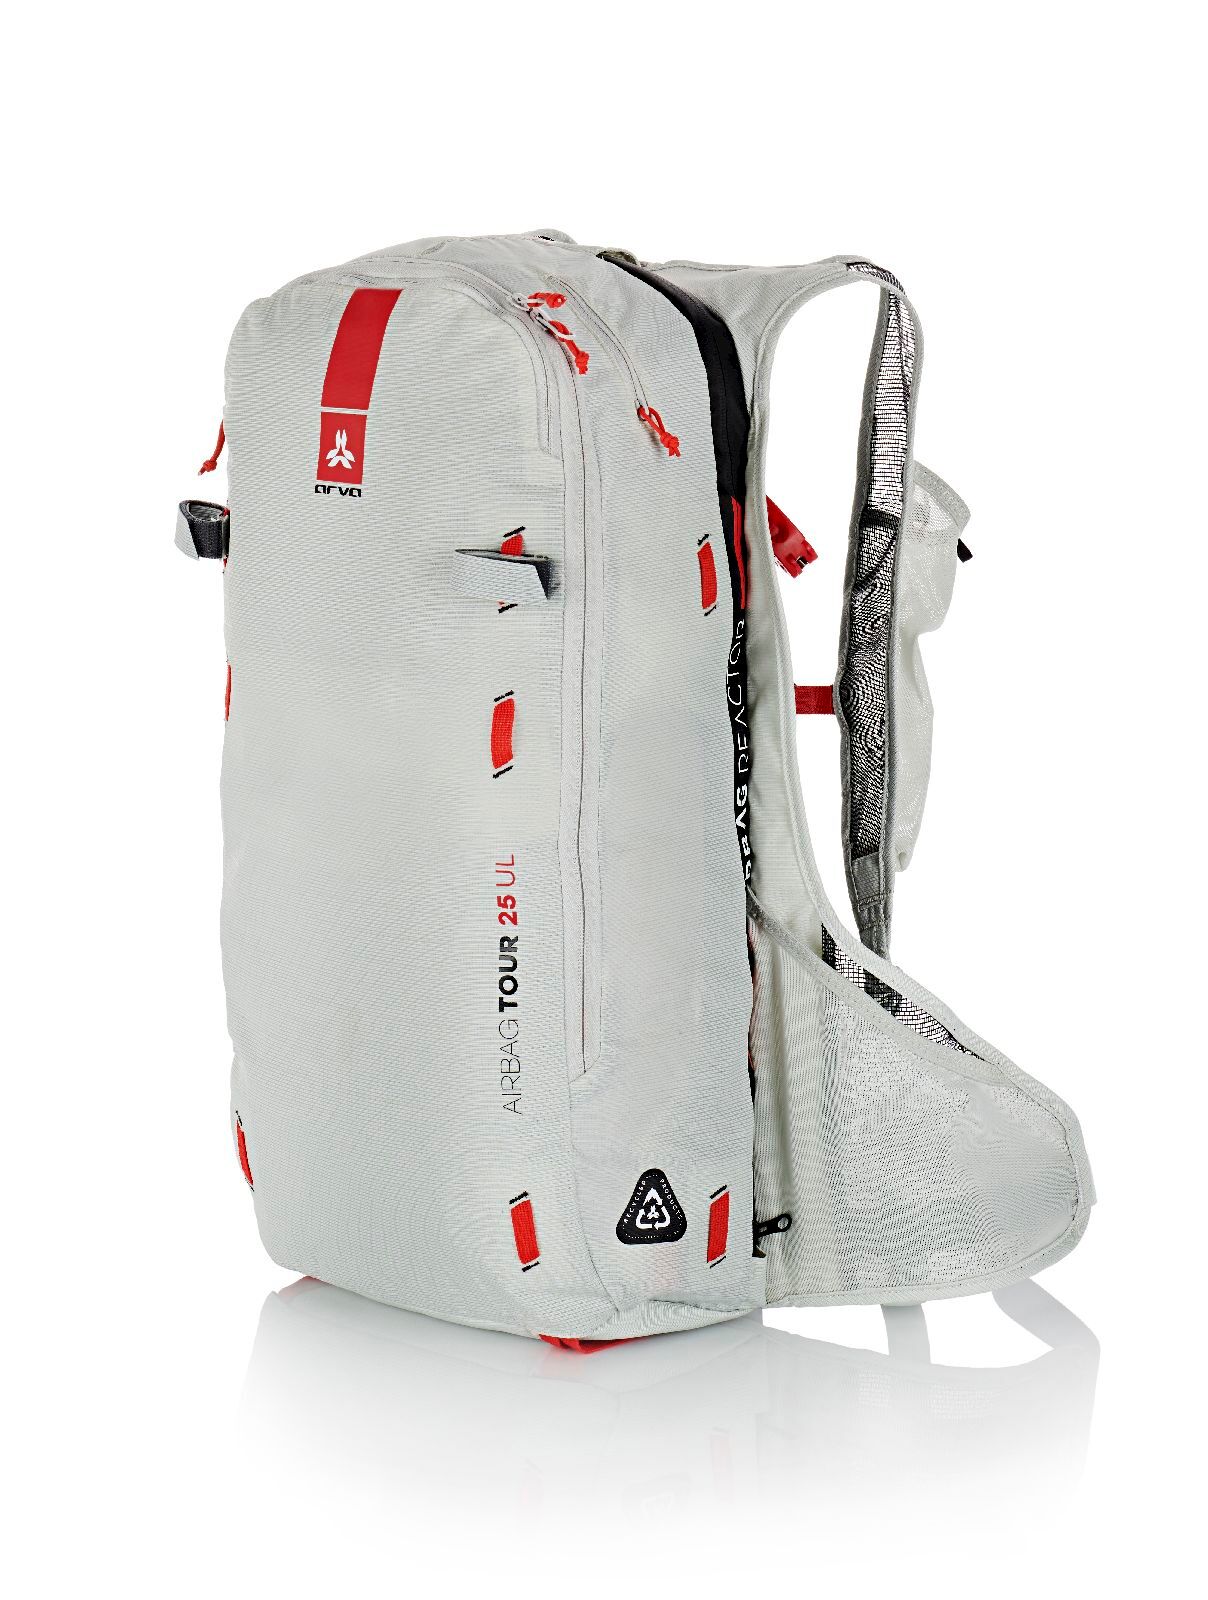 Arva Airbag Tour 25 UL Reactor - Avalanche airbag backpack